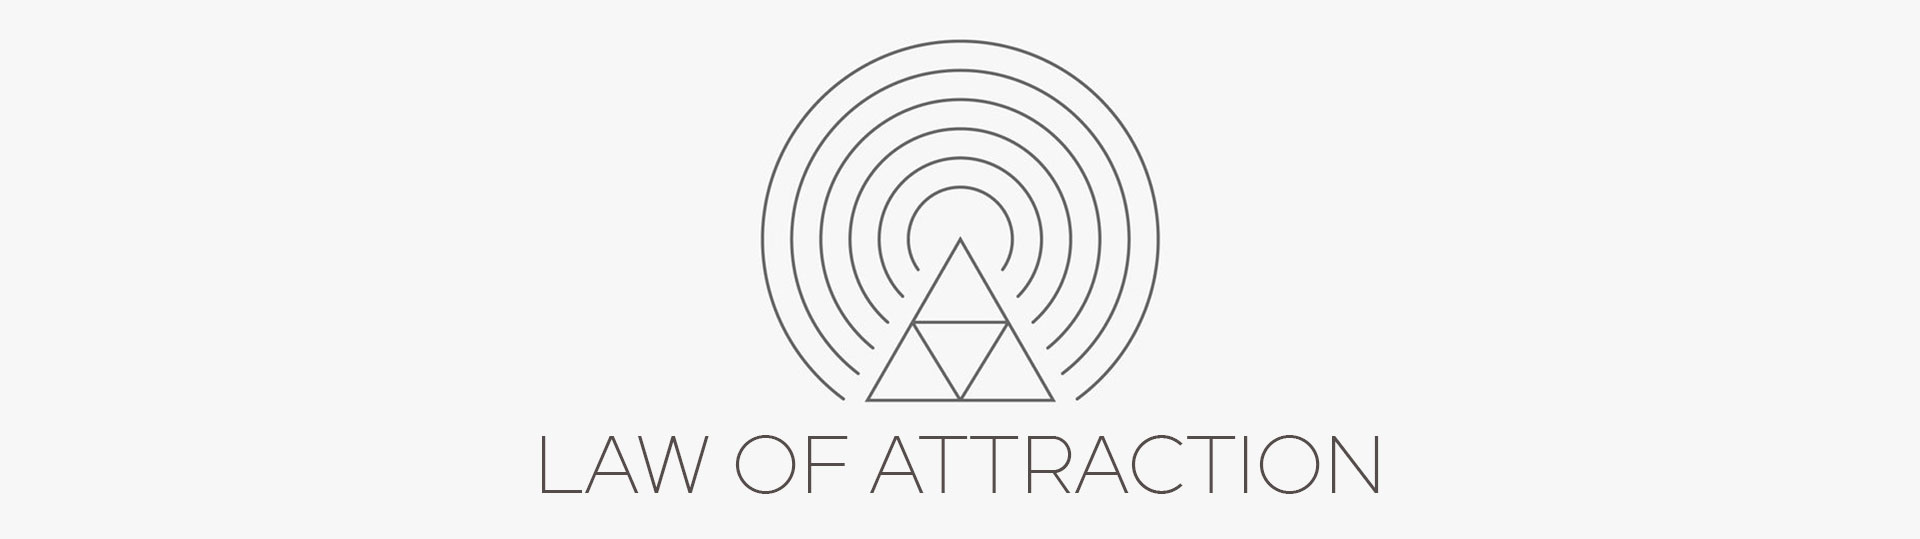 Law Of Attraction business coaching at Elite Beauty School in Bishop's Stortford, Hertfordshire